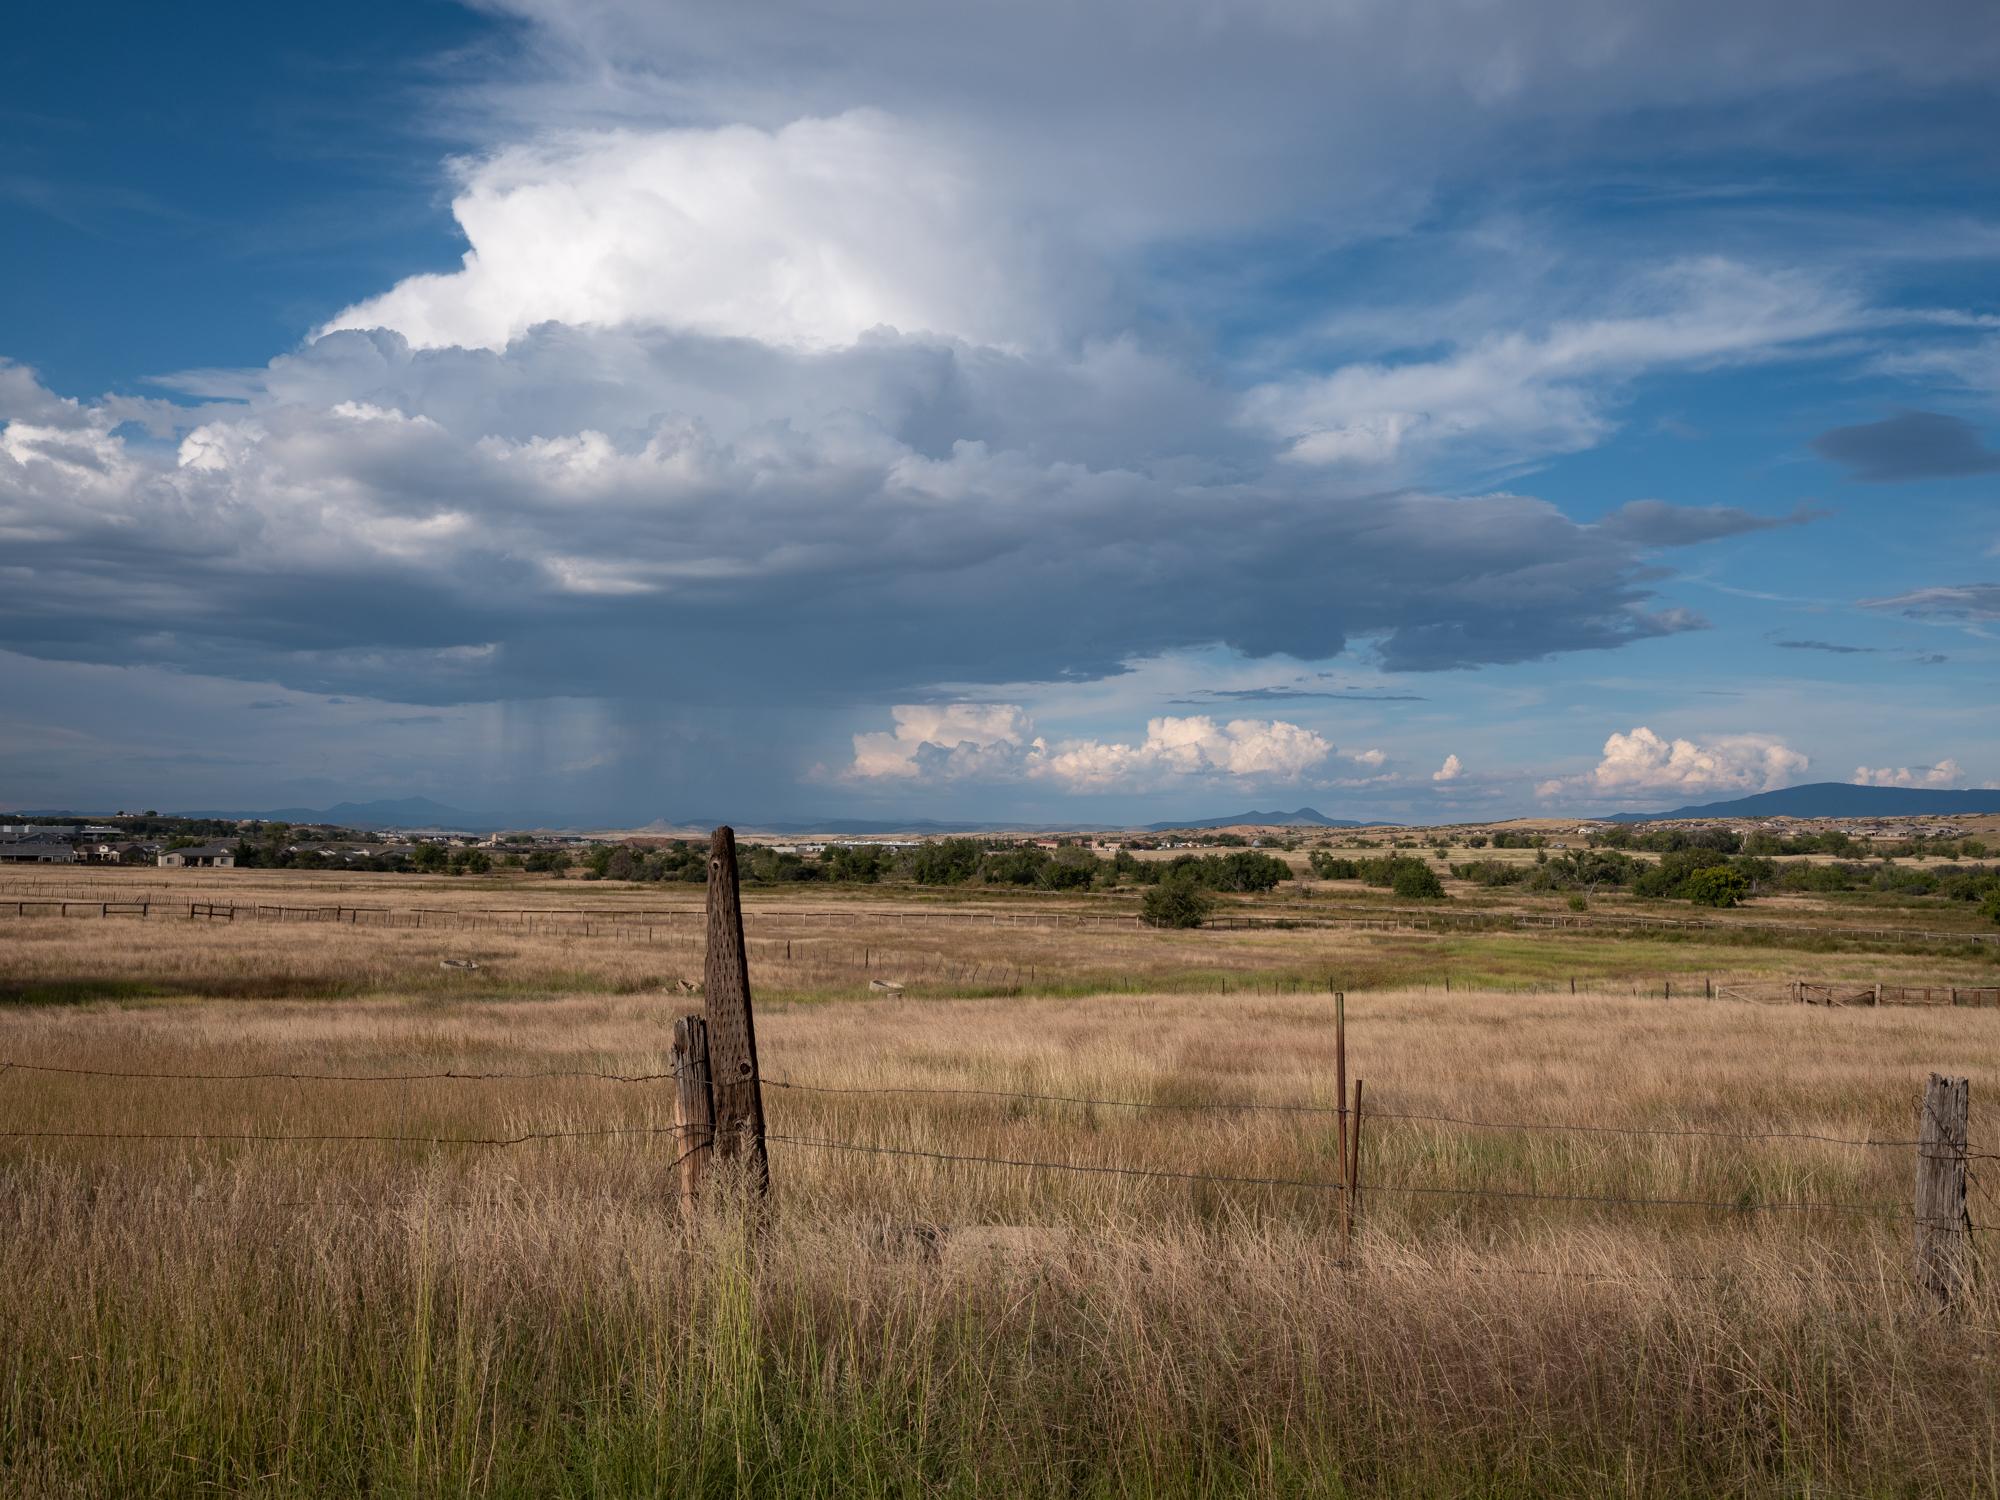 New Arizonans - HuffPost - A roadside view with a distant rainstorm outside...